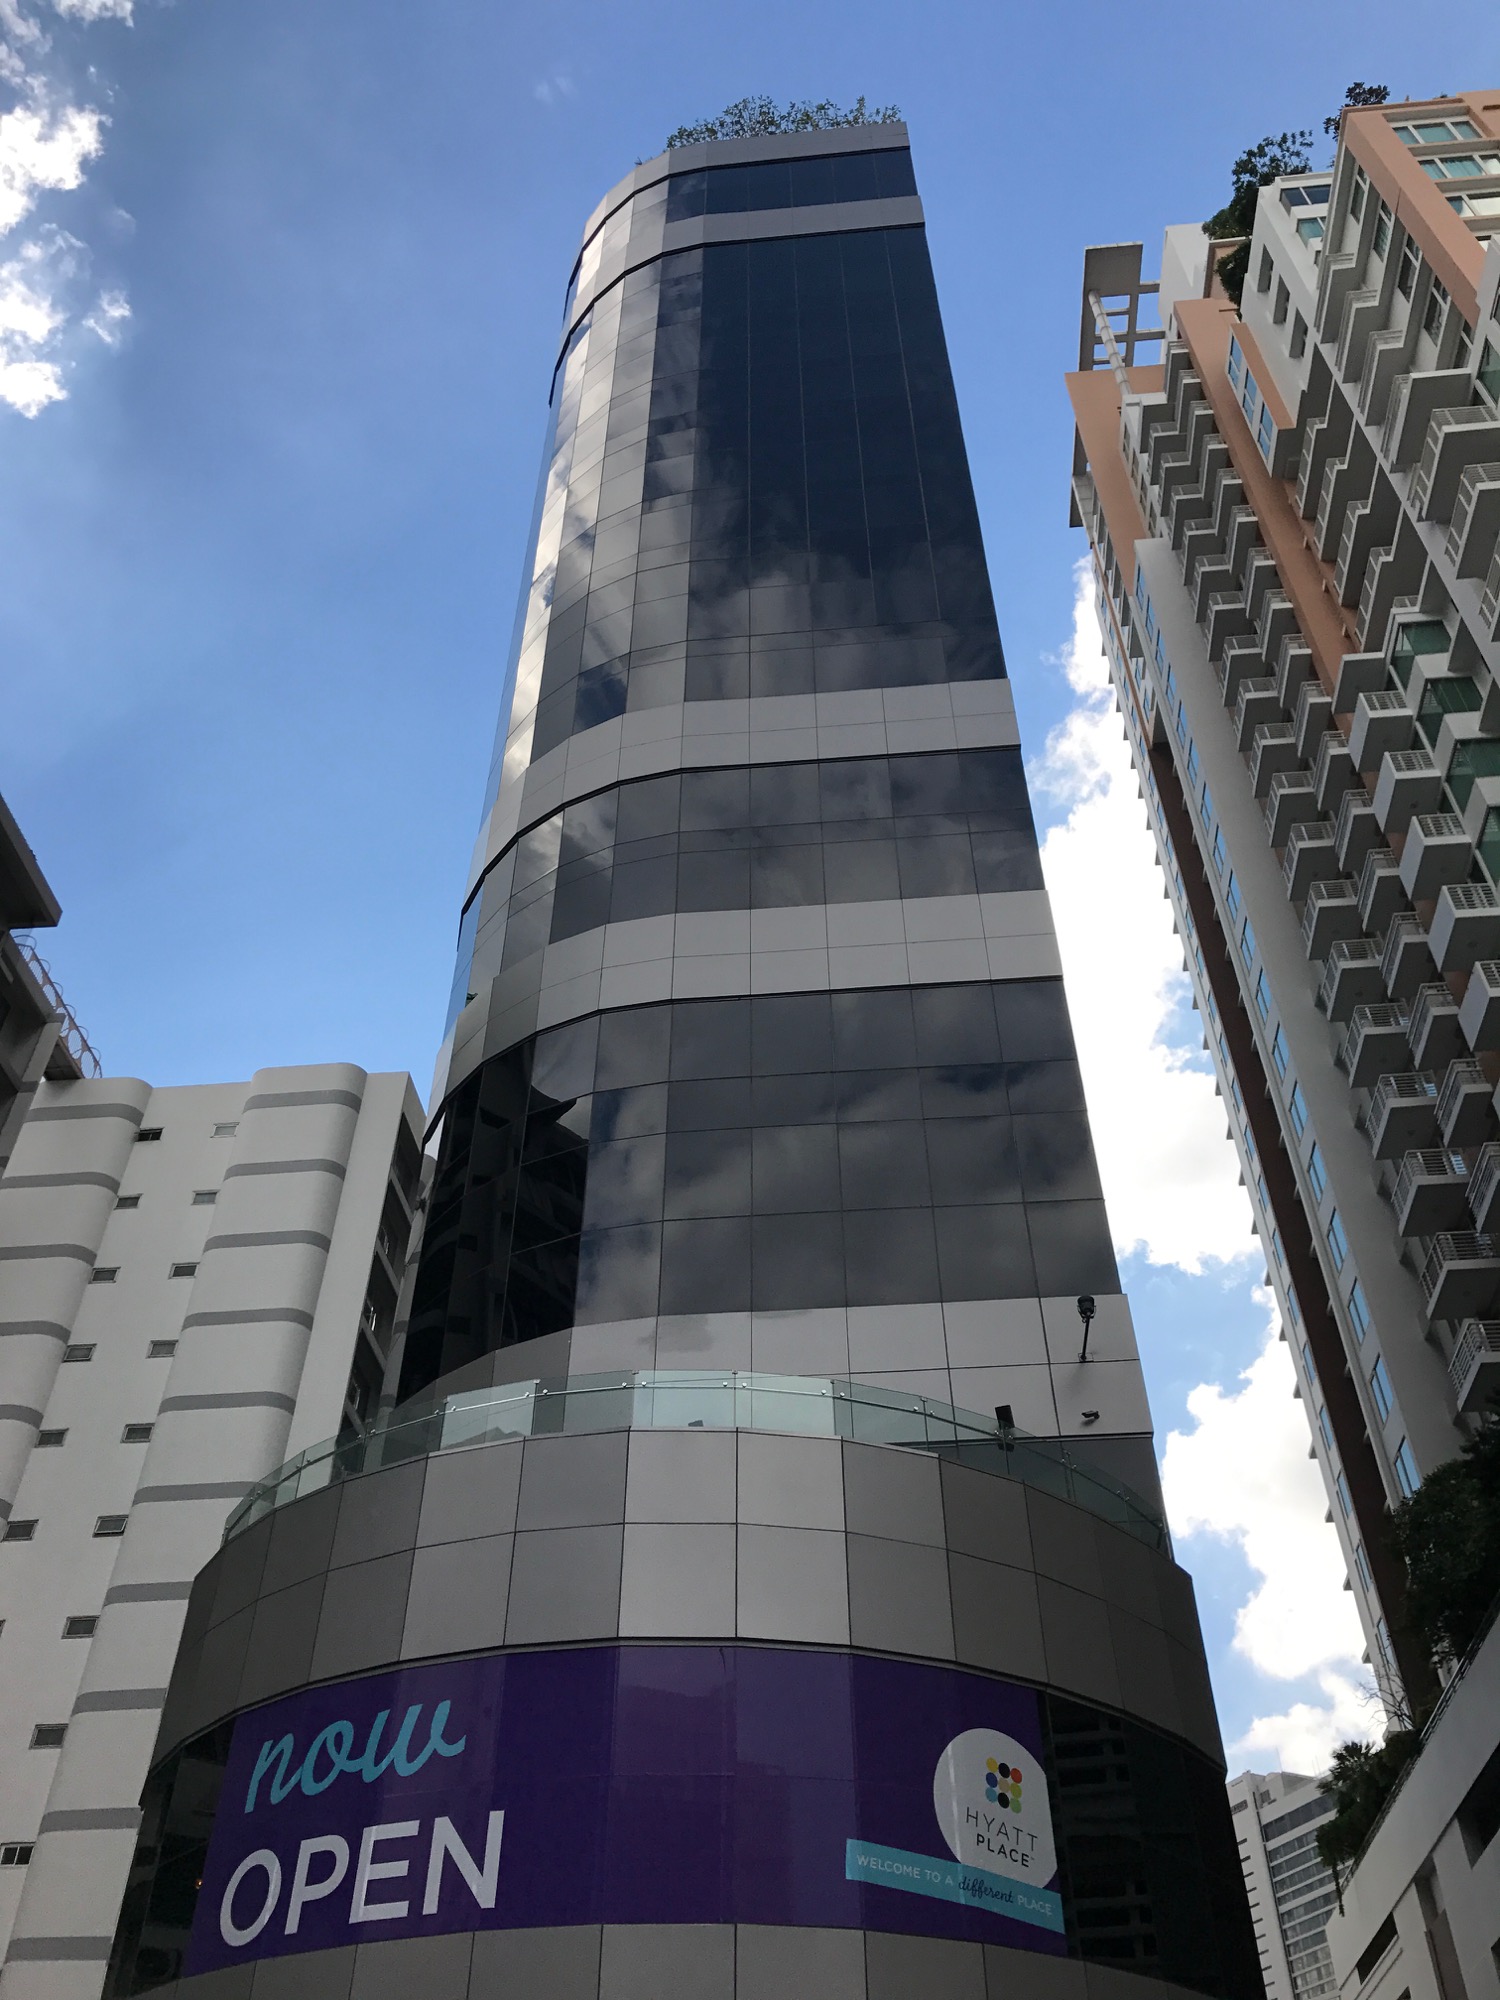 a tall building with a purple sign on the side